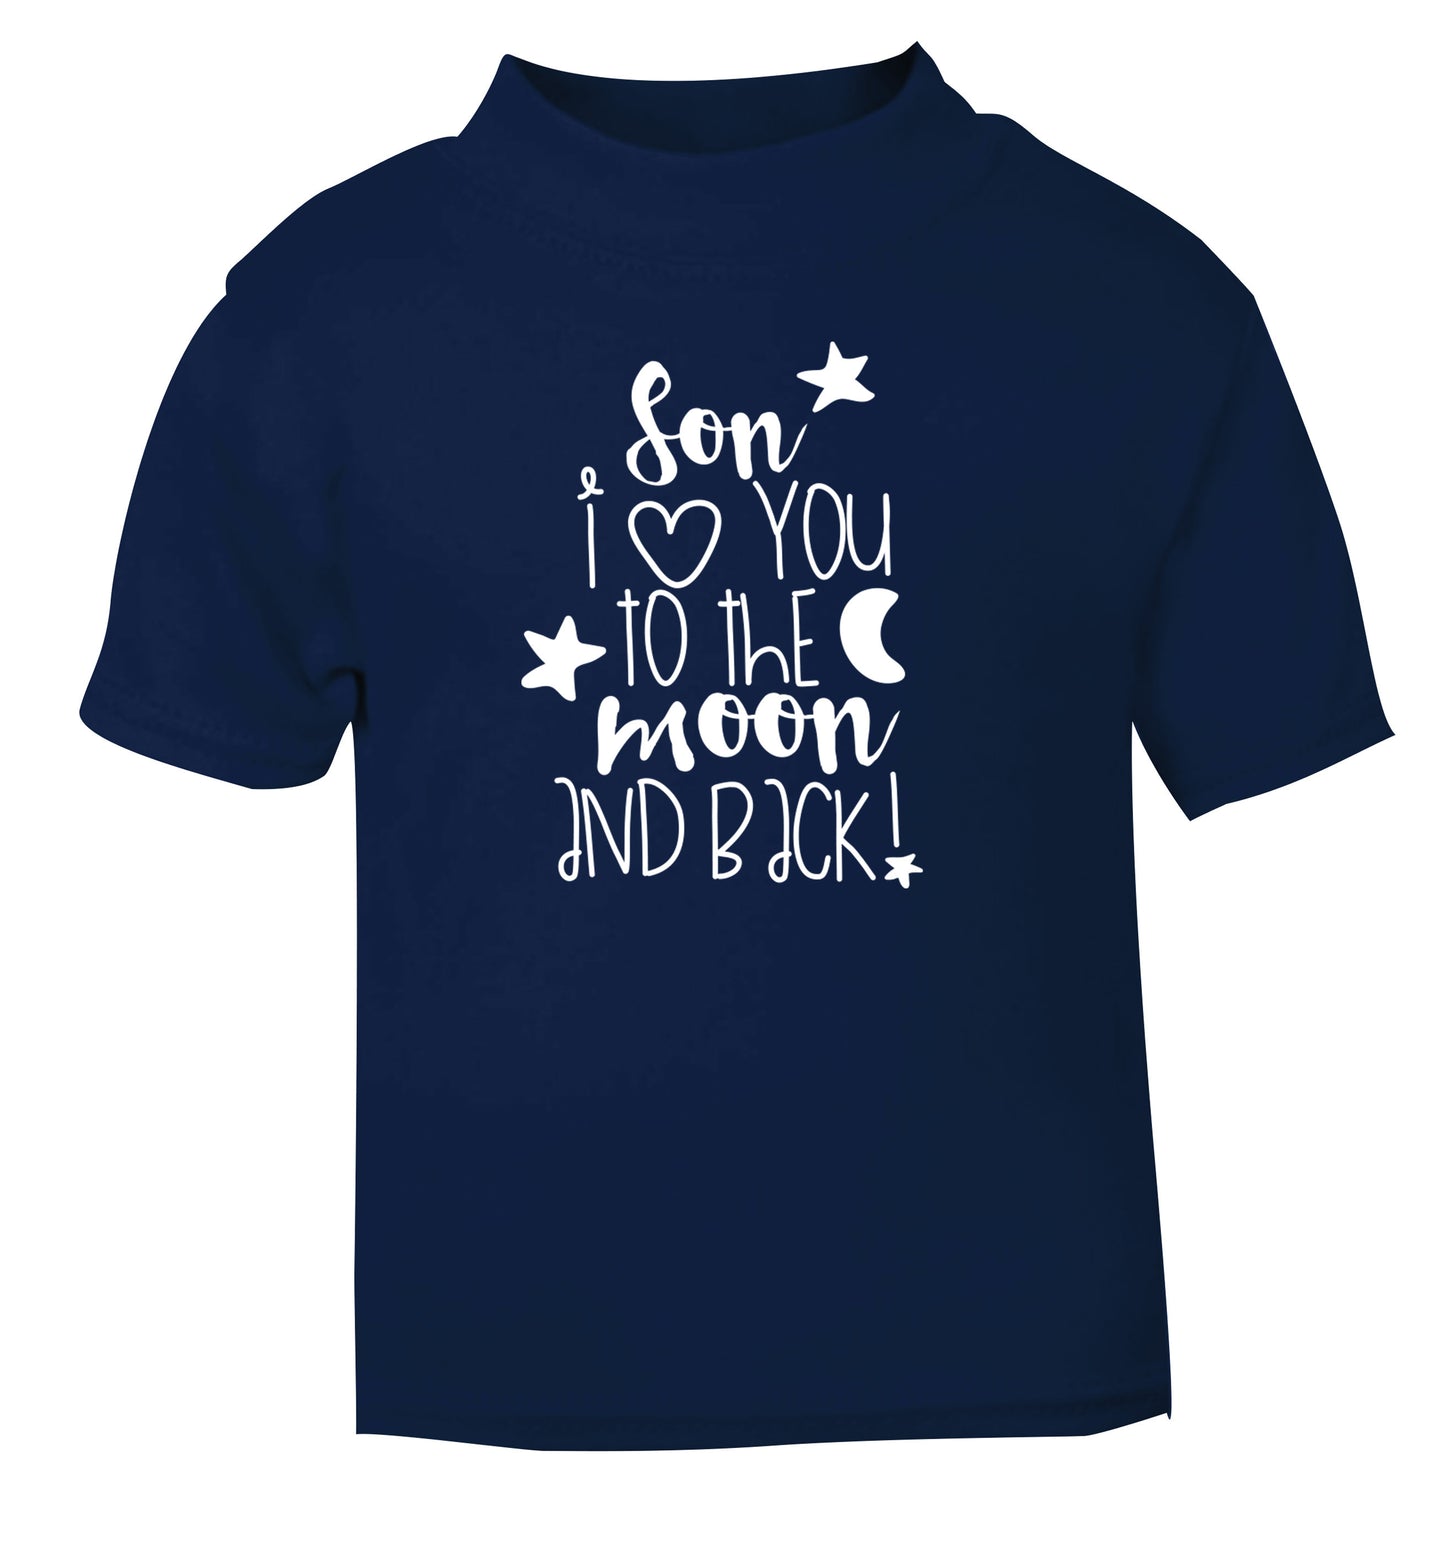 Son I love you to the moon and back navy Baby Toddler Tshirt 2 Years